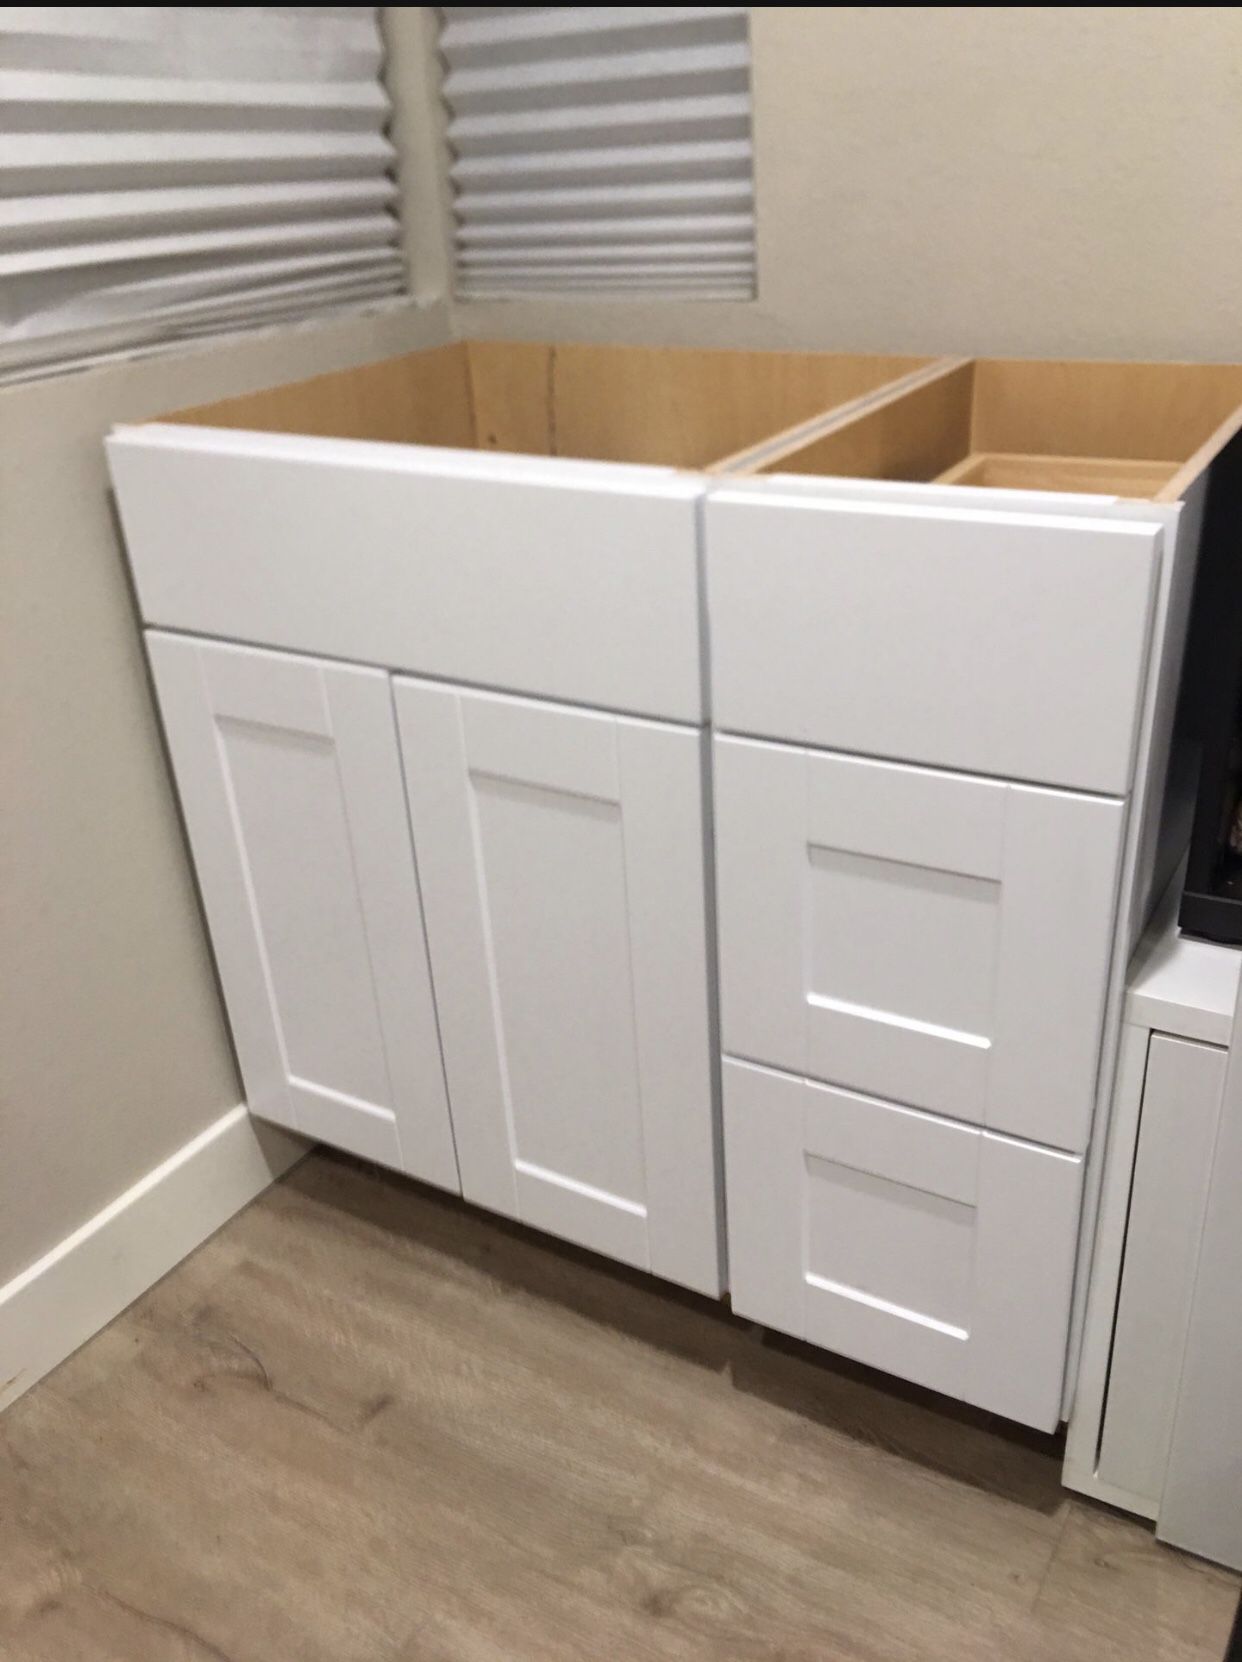 Vanity Drawer Base Cabinet w/ Drawers White kitchen bath laundry    L36.7xW 23.5 x H 34.5 inches Orig $458